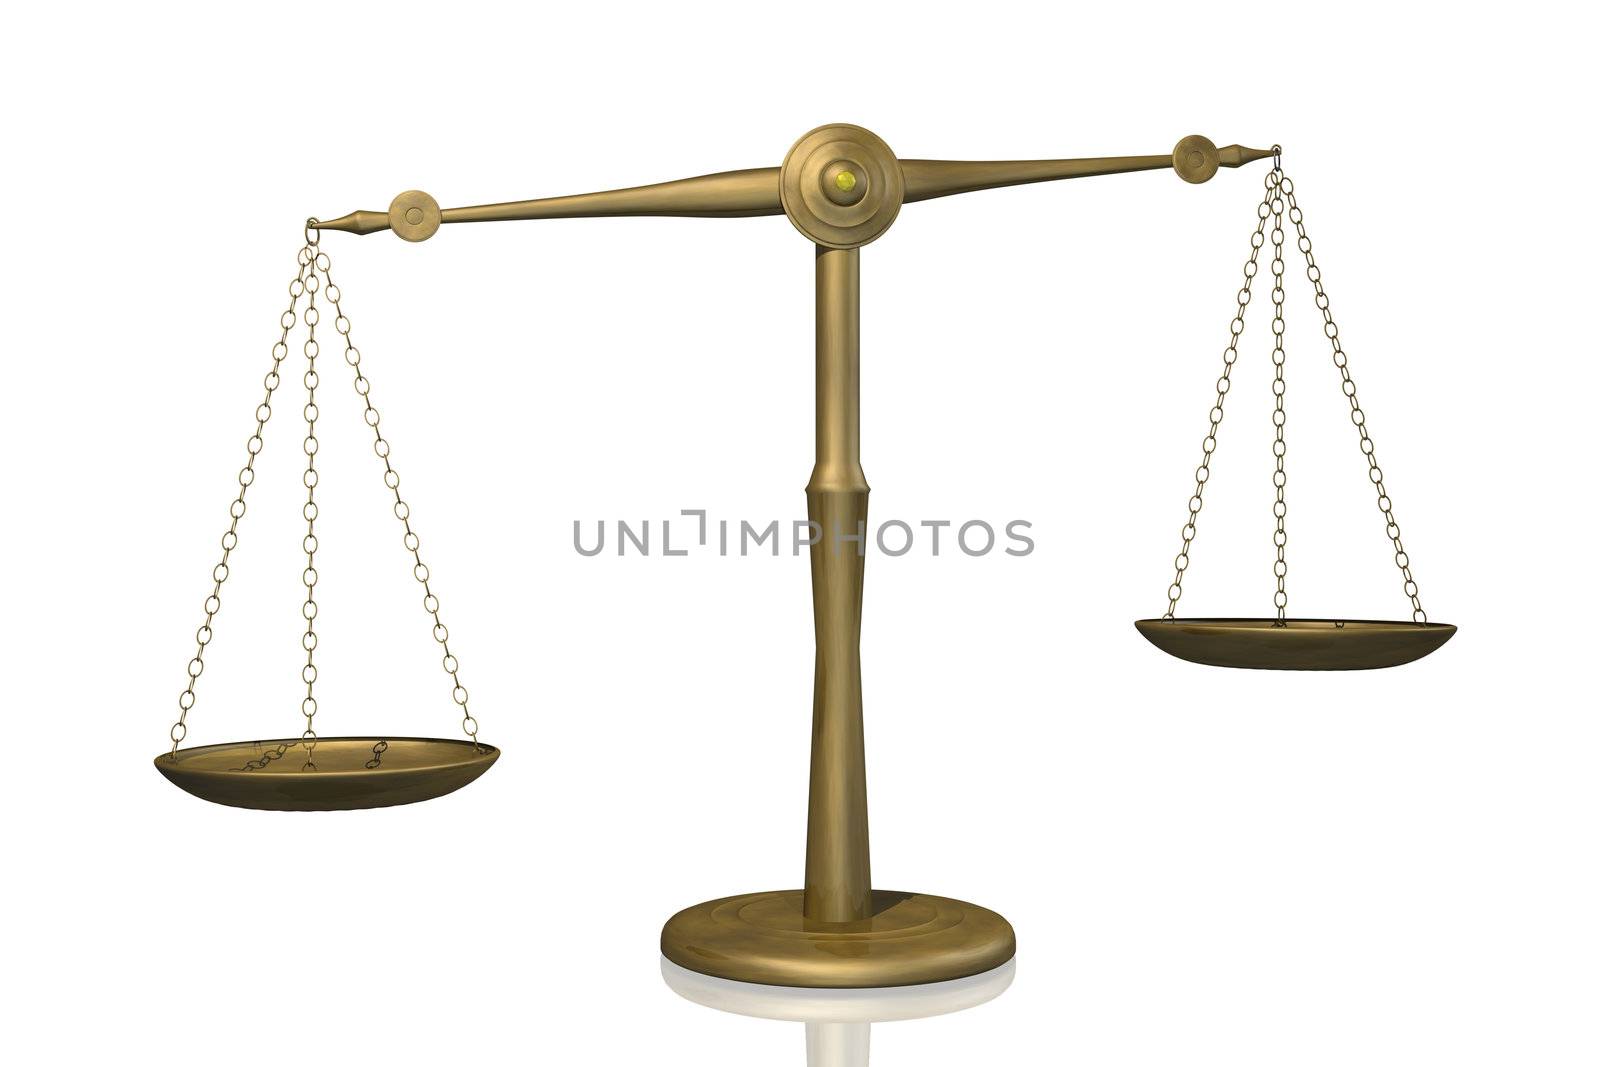 Concept image of a balance shown with a scale isolated on a white background.